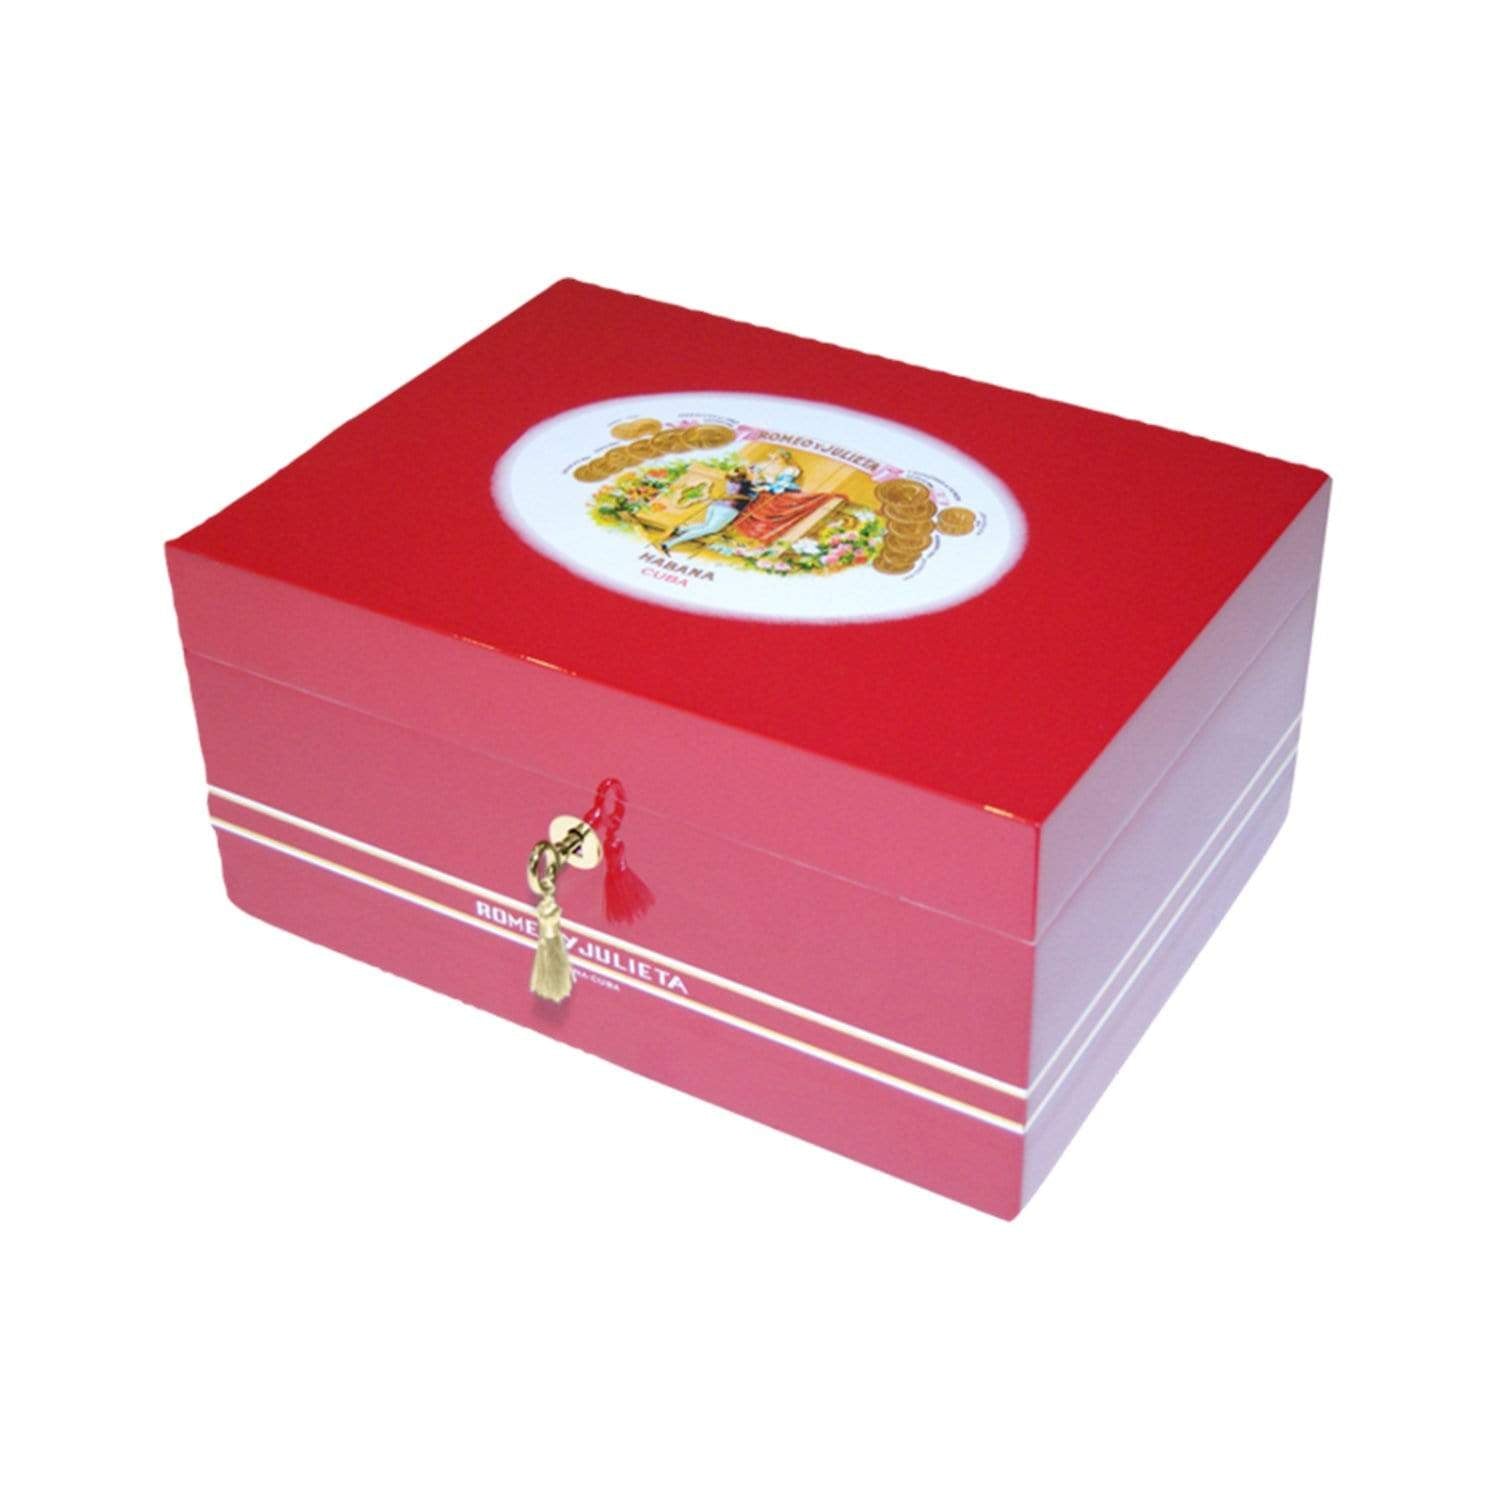 HABANOS ACCESSORIES Red / 31 x 24 x 16 cm HỘP GIỮ ẨM HABANOS GLOBAL BRANDS